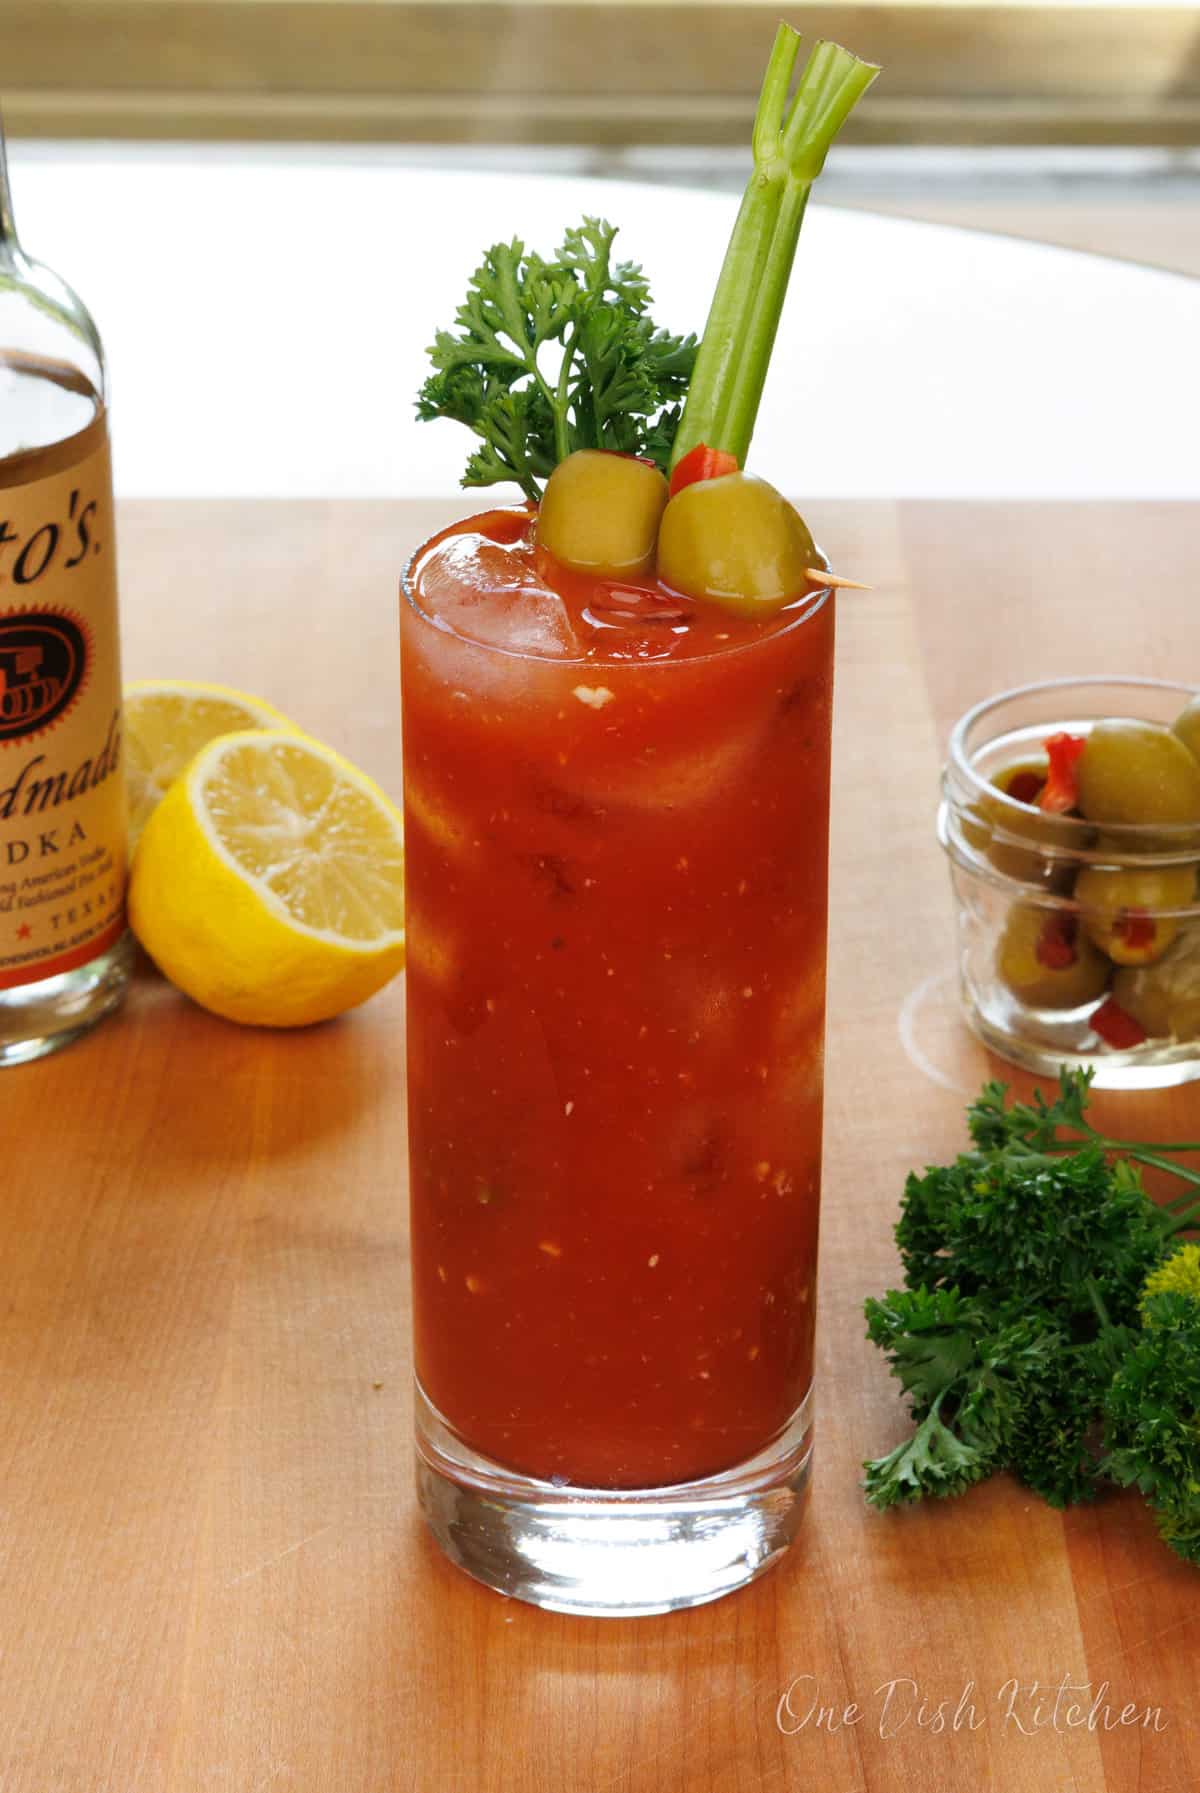 a bloody mary cocktail on a kitchen table next to a lemon wedge, olives, and celery